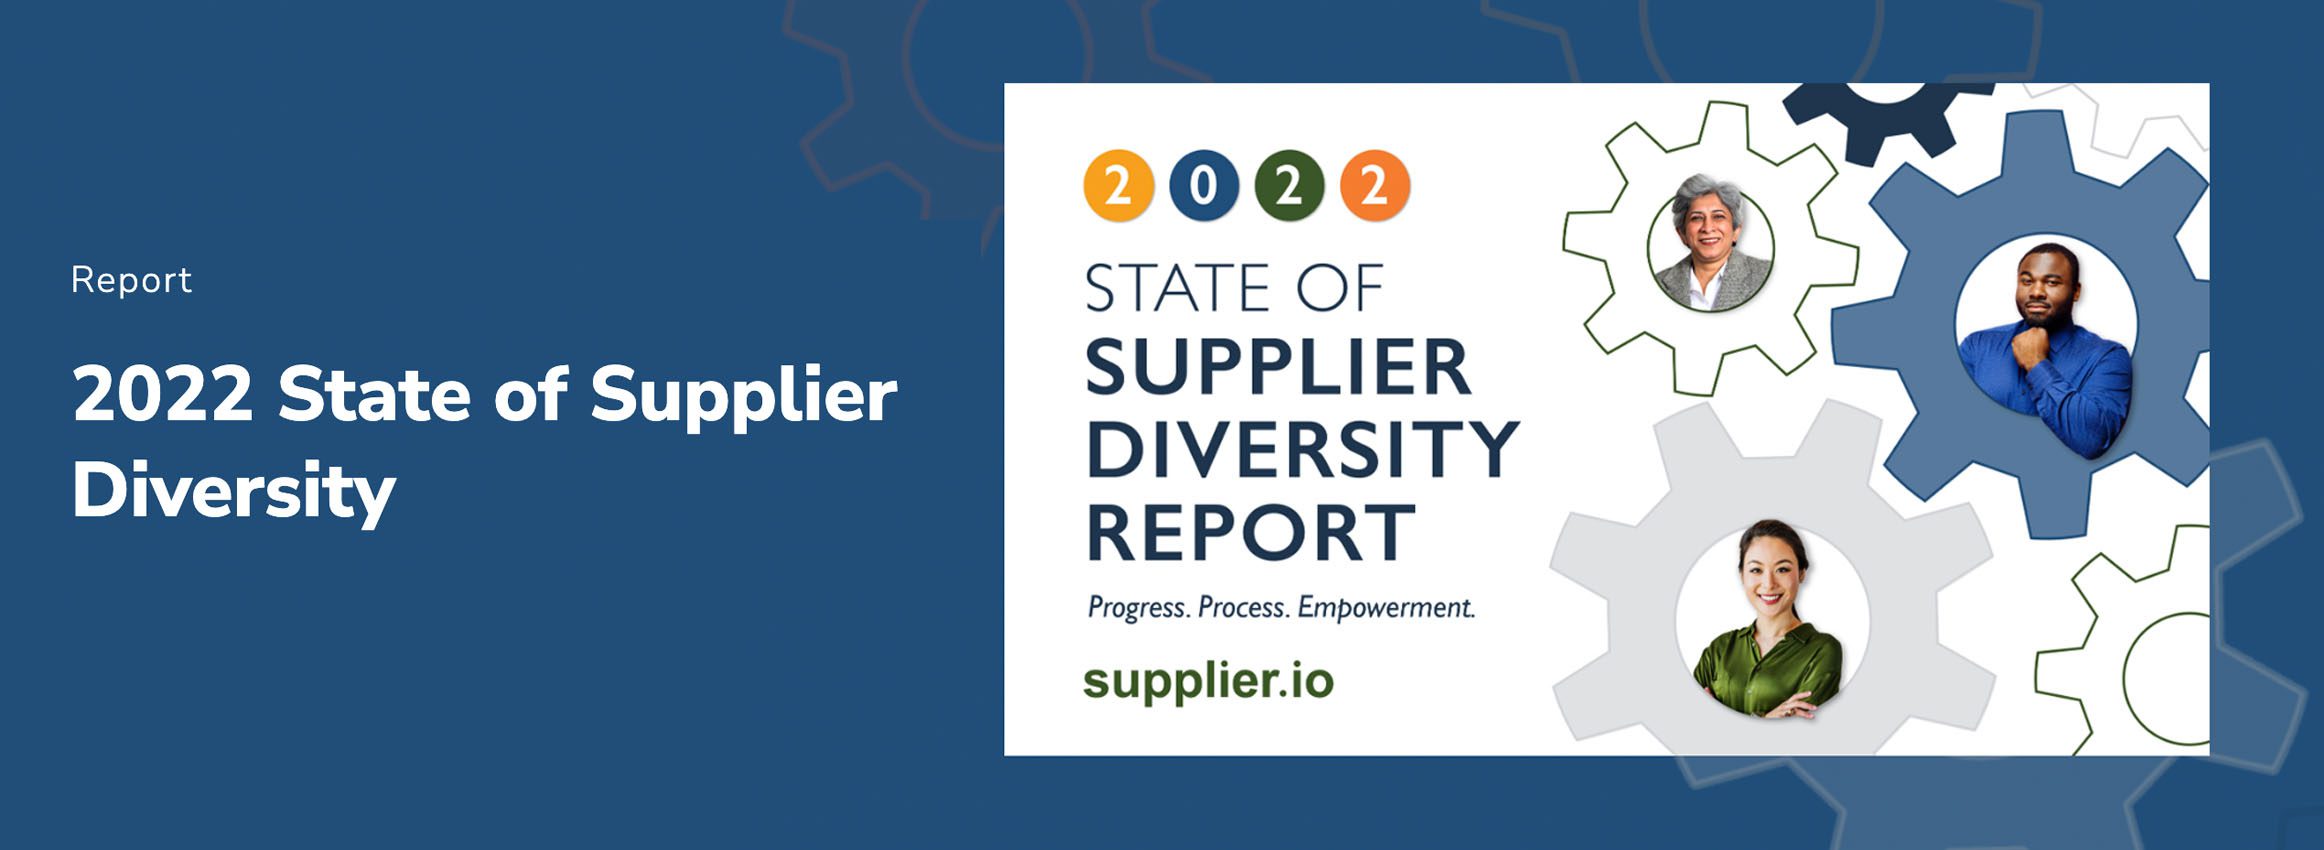 Supplier.io Releases Fifth State of Supplier Diversity Report